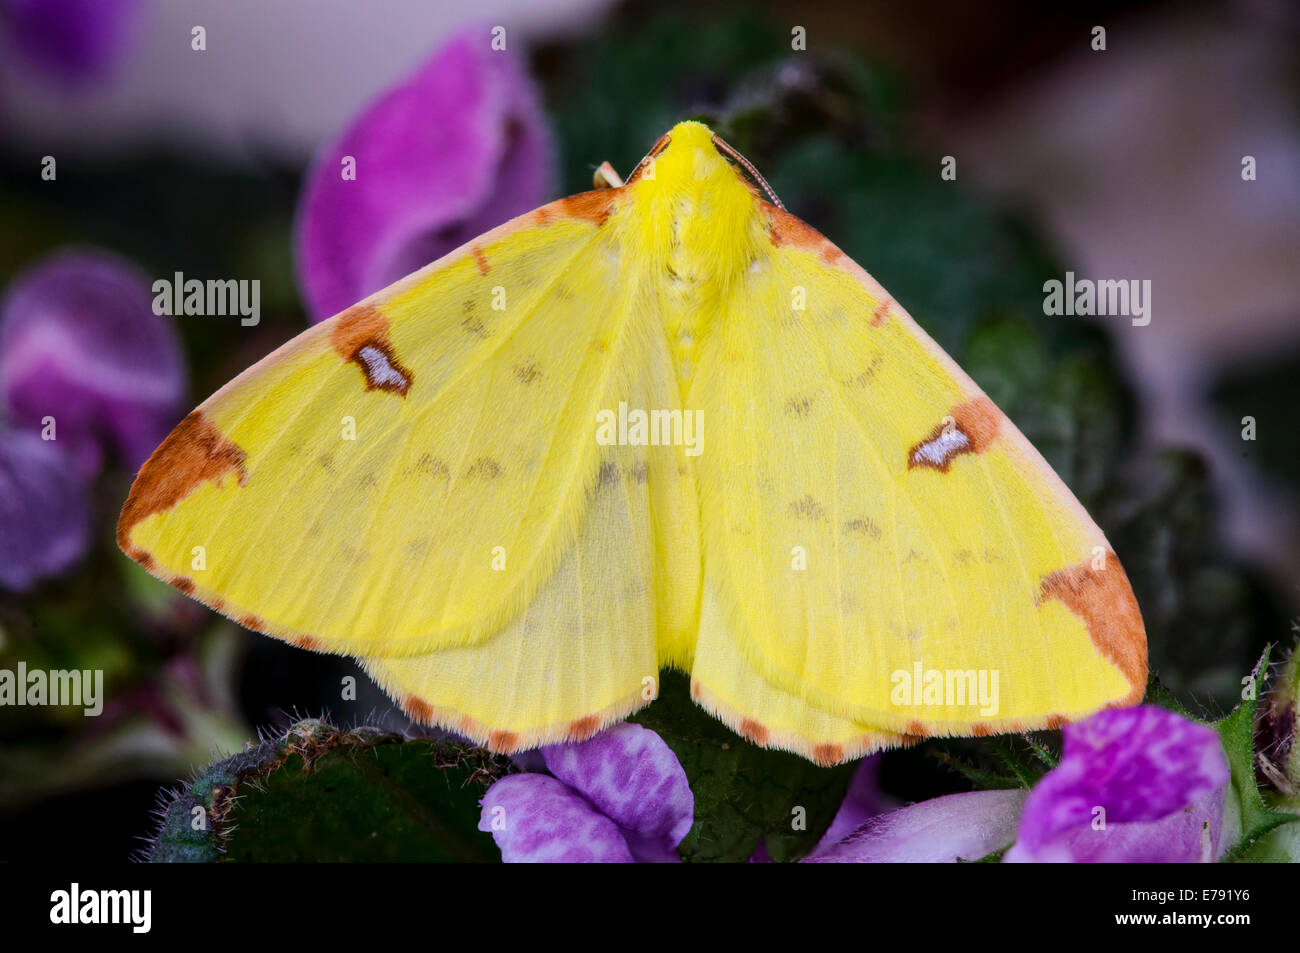 Brimstone moth (Opisthograptis luteolata) sitting on flowering dead-nettles in a garden in Sowerby, North Yorkshire. April. Stock Photo